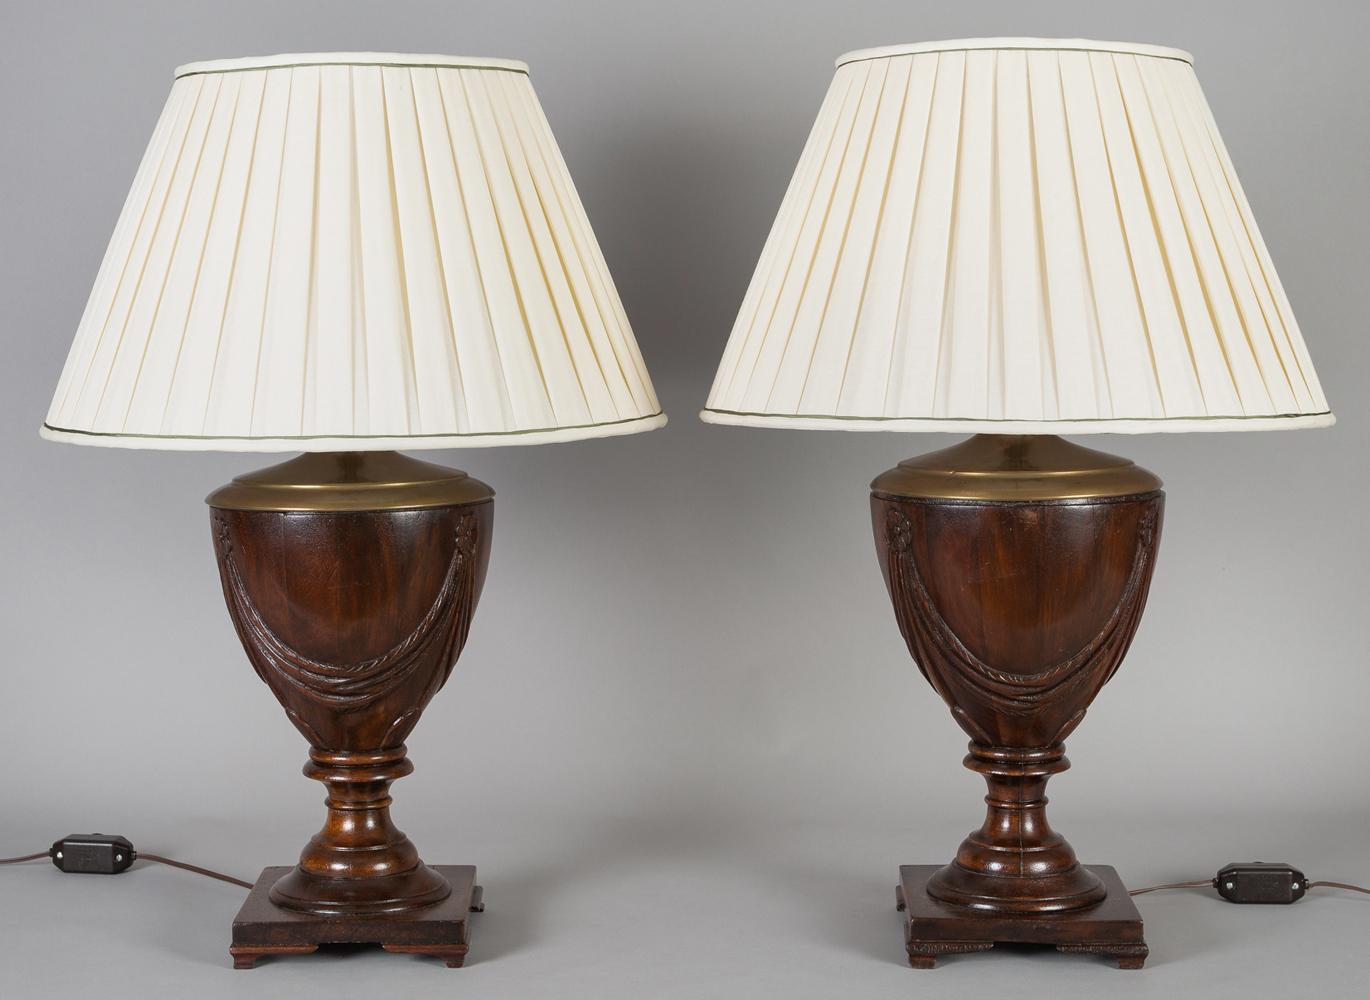 Pair of Georgian style mahogany urn shaped lamps, each with carved rosettes and swag decoration, pleated shades, mounted on turned pedestal and square bases with bracket feet.